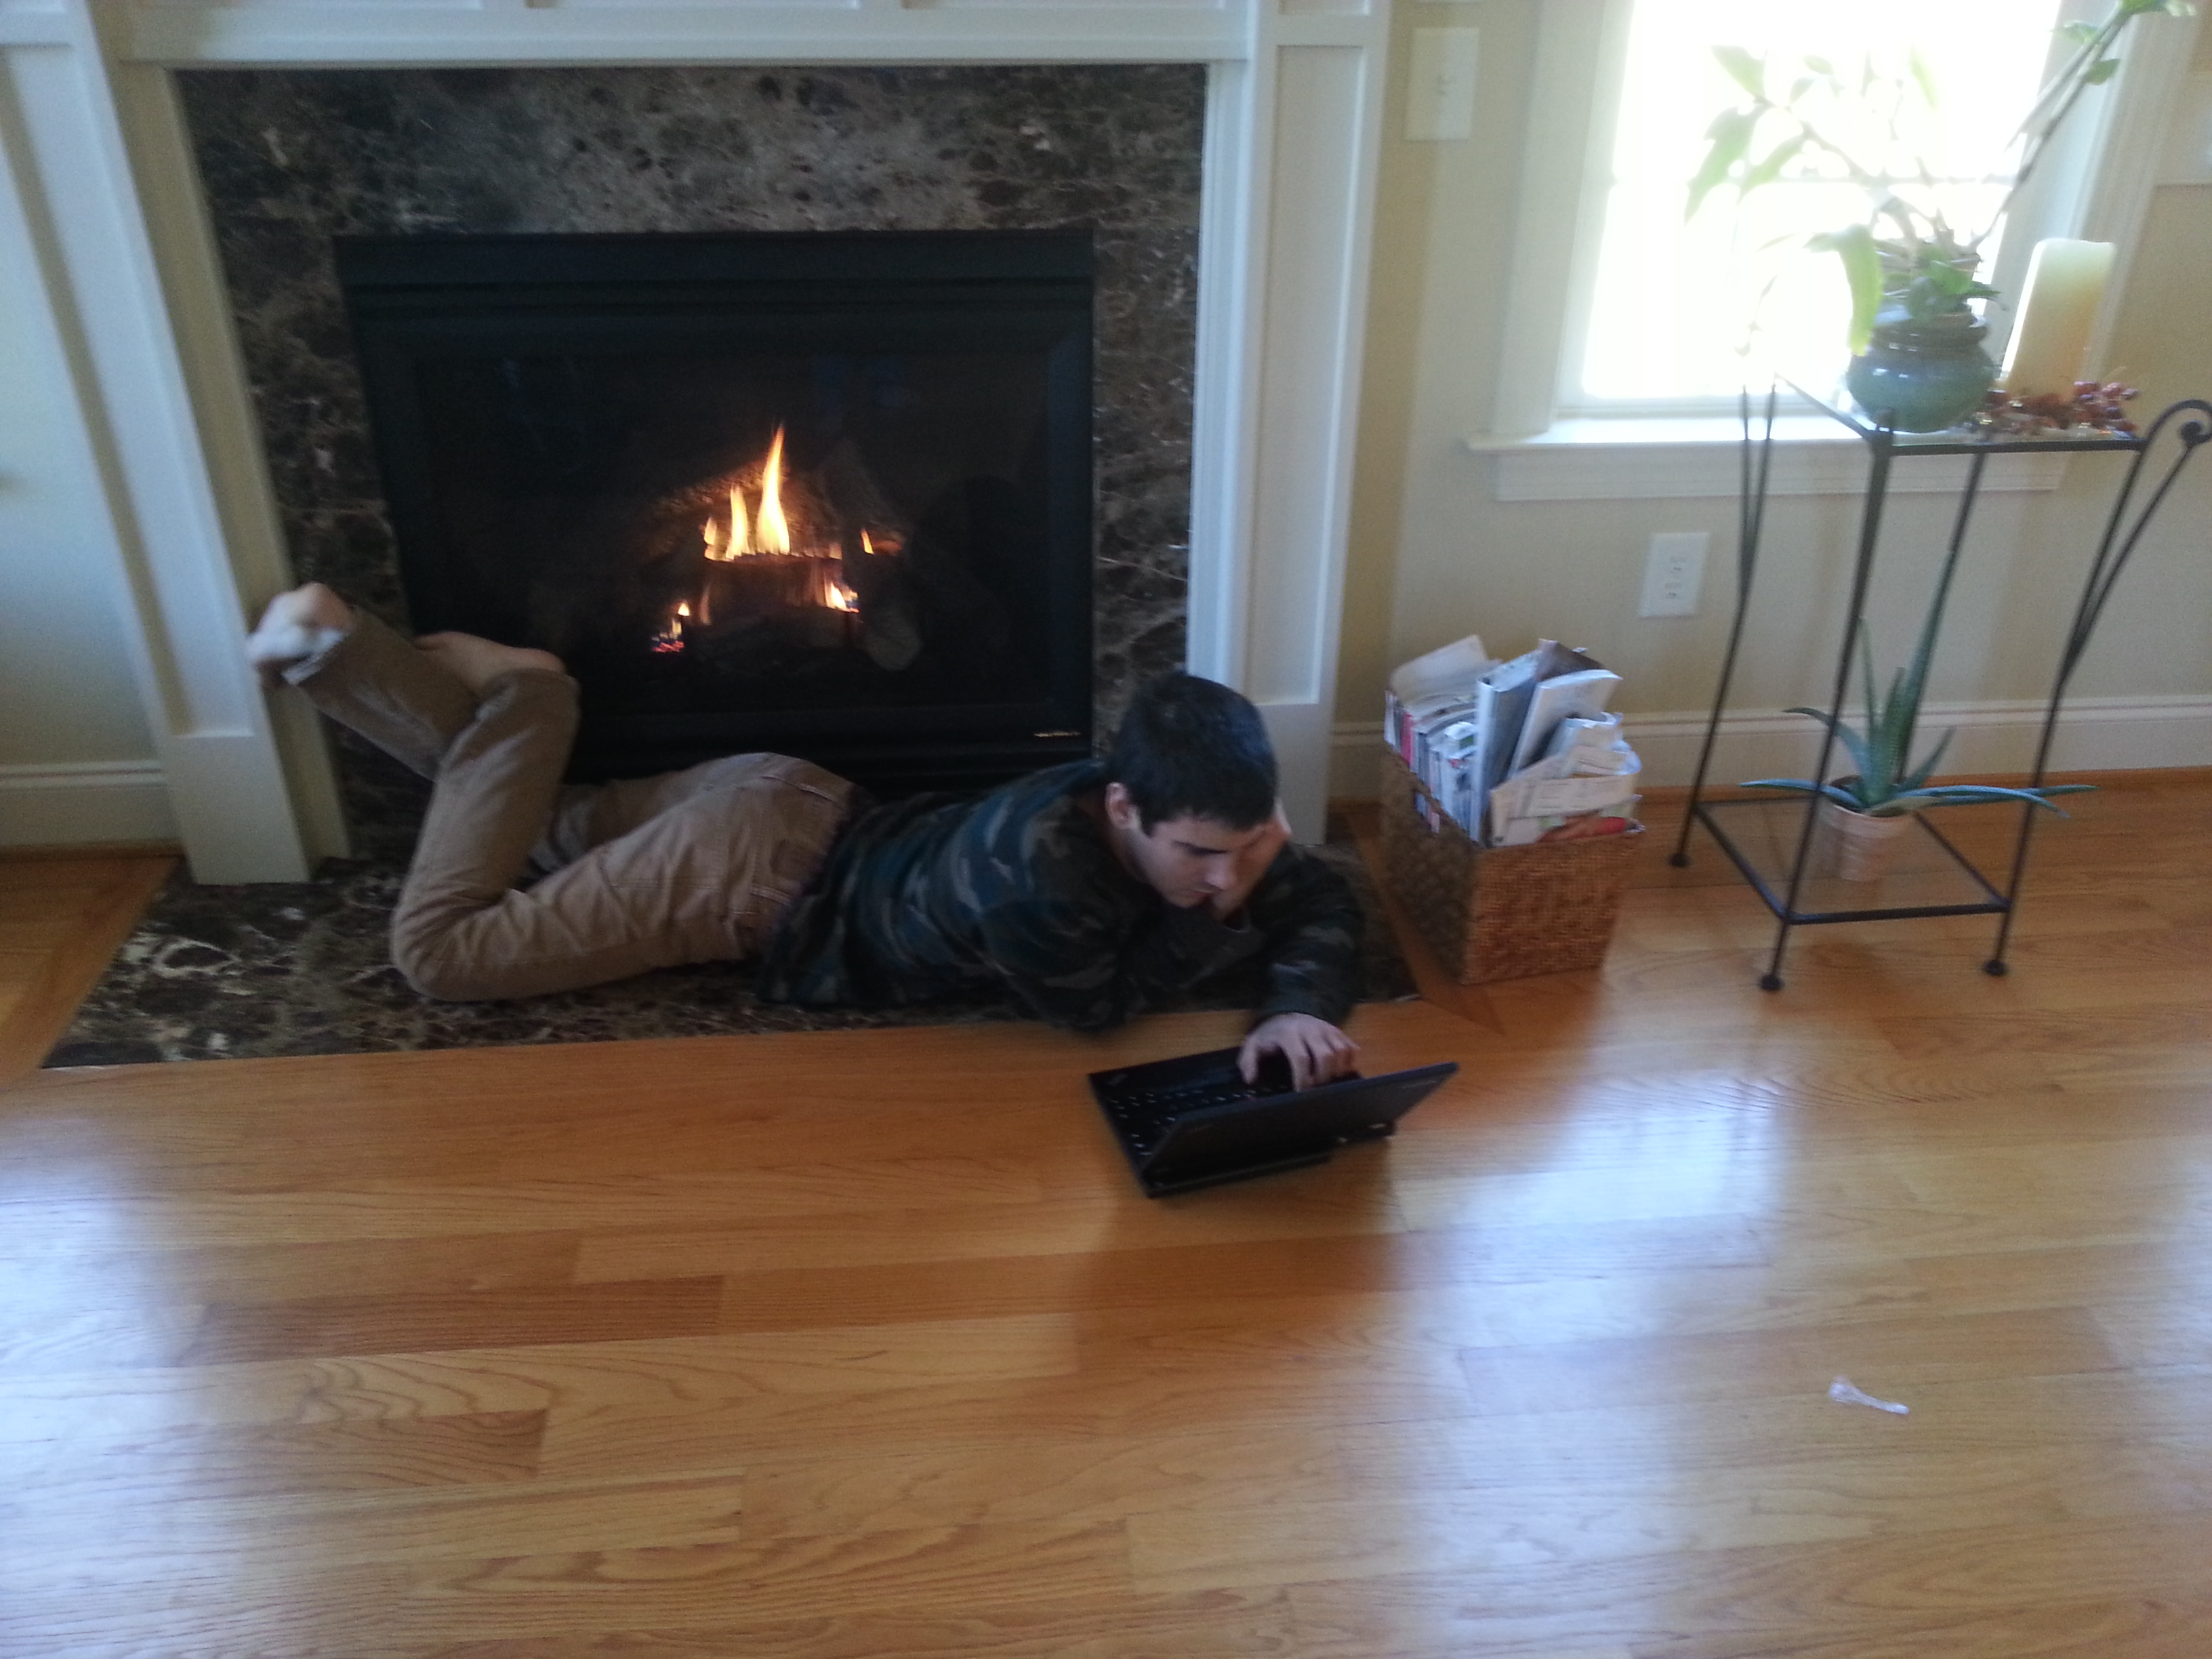 Christian studying by the fire